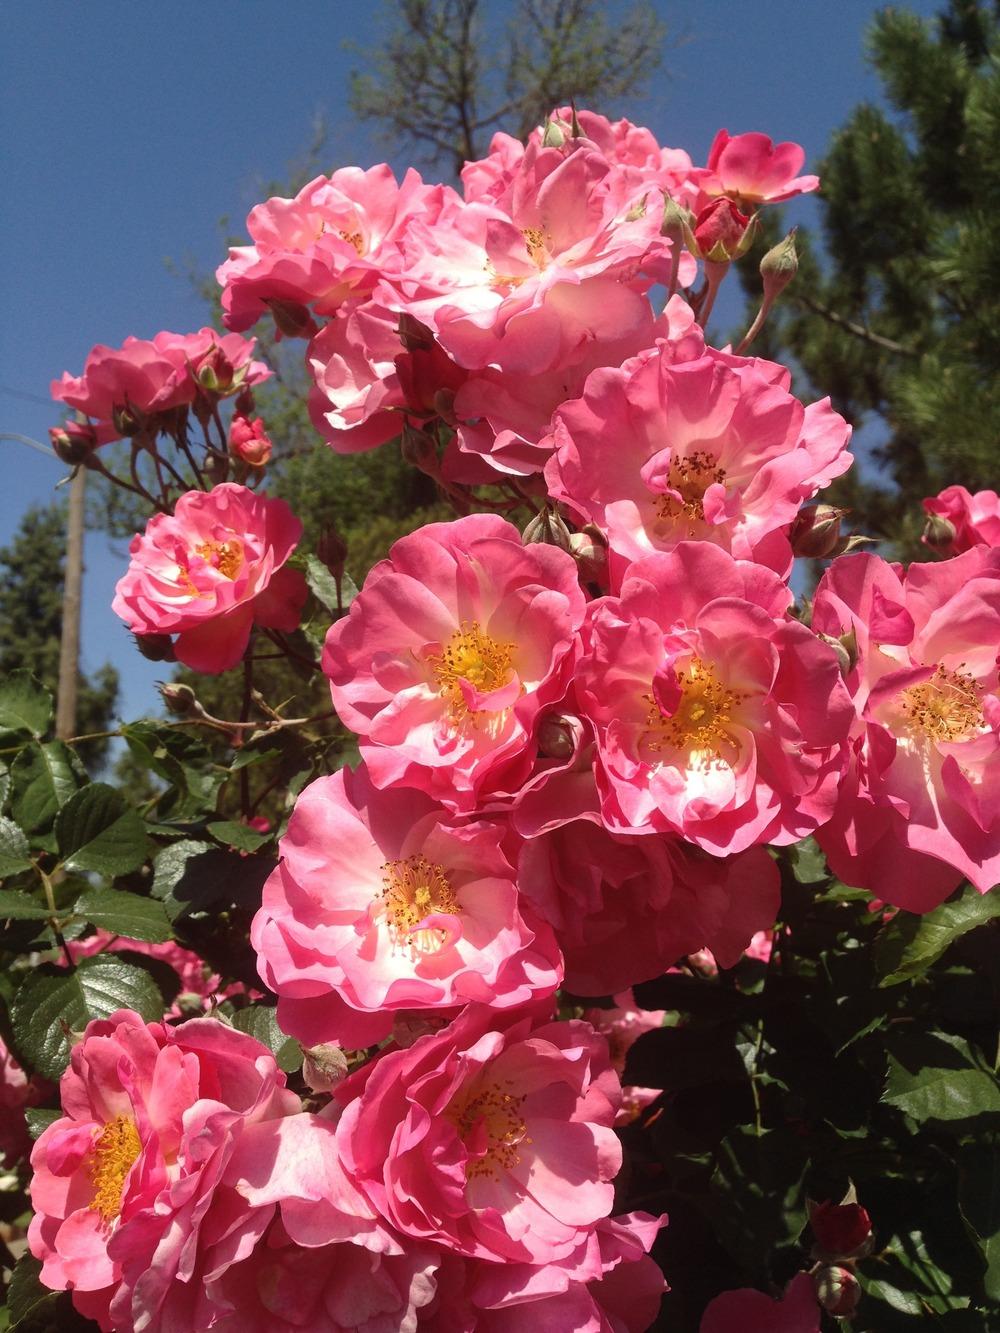 Photo of Roses (Rosa) uploaded by HamiltonSquare